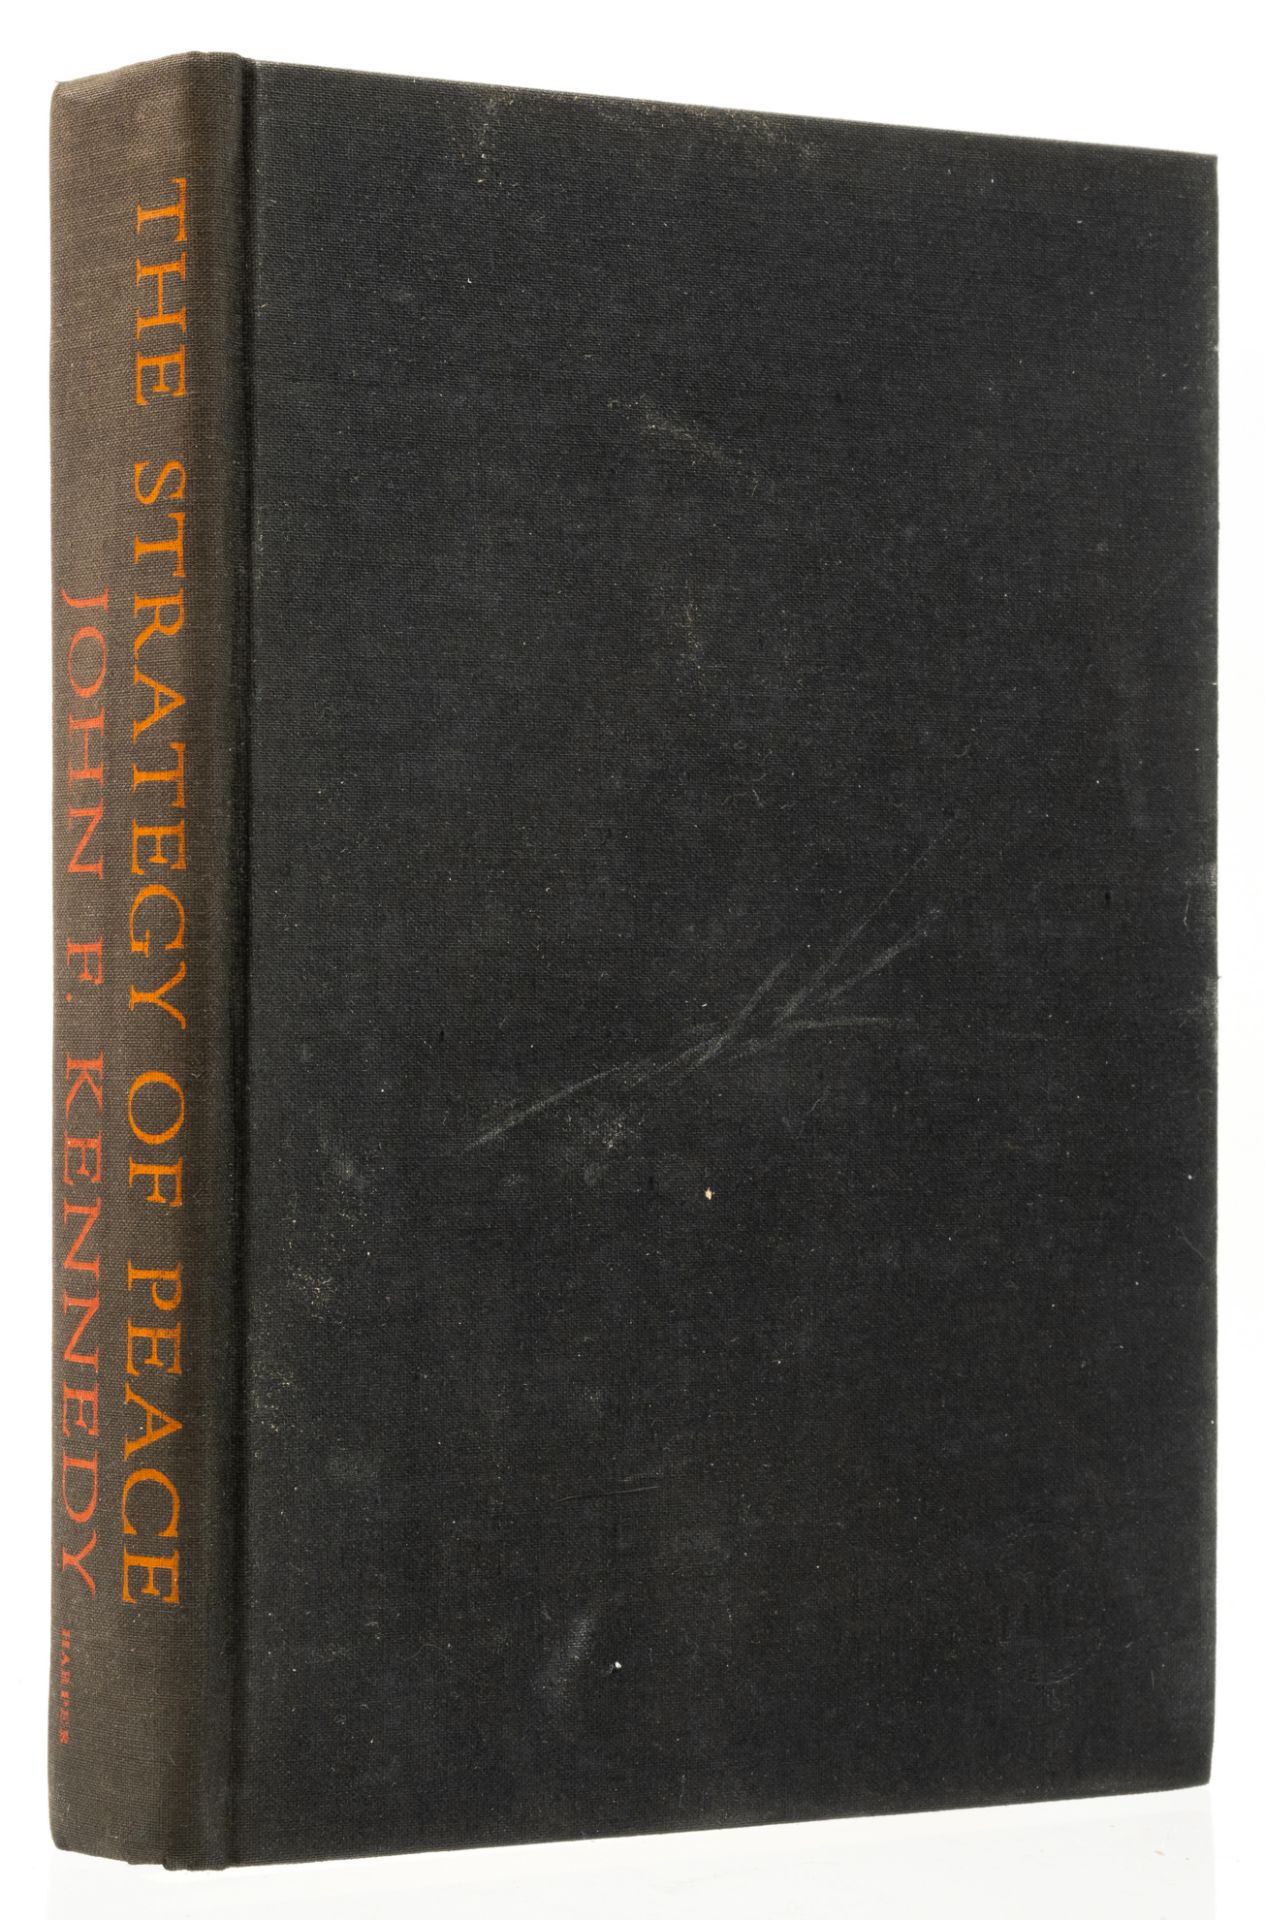 Kennedy (John F.) The Stategy of Peace, first edition, signed presentation inscription from the a...